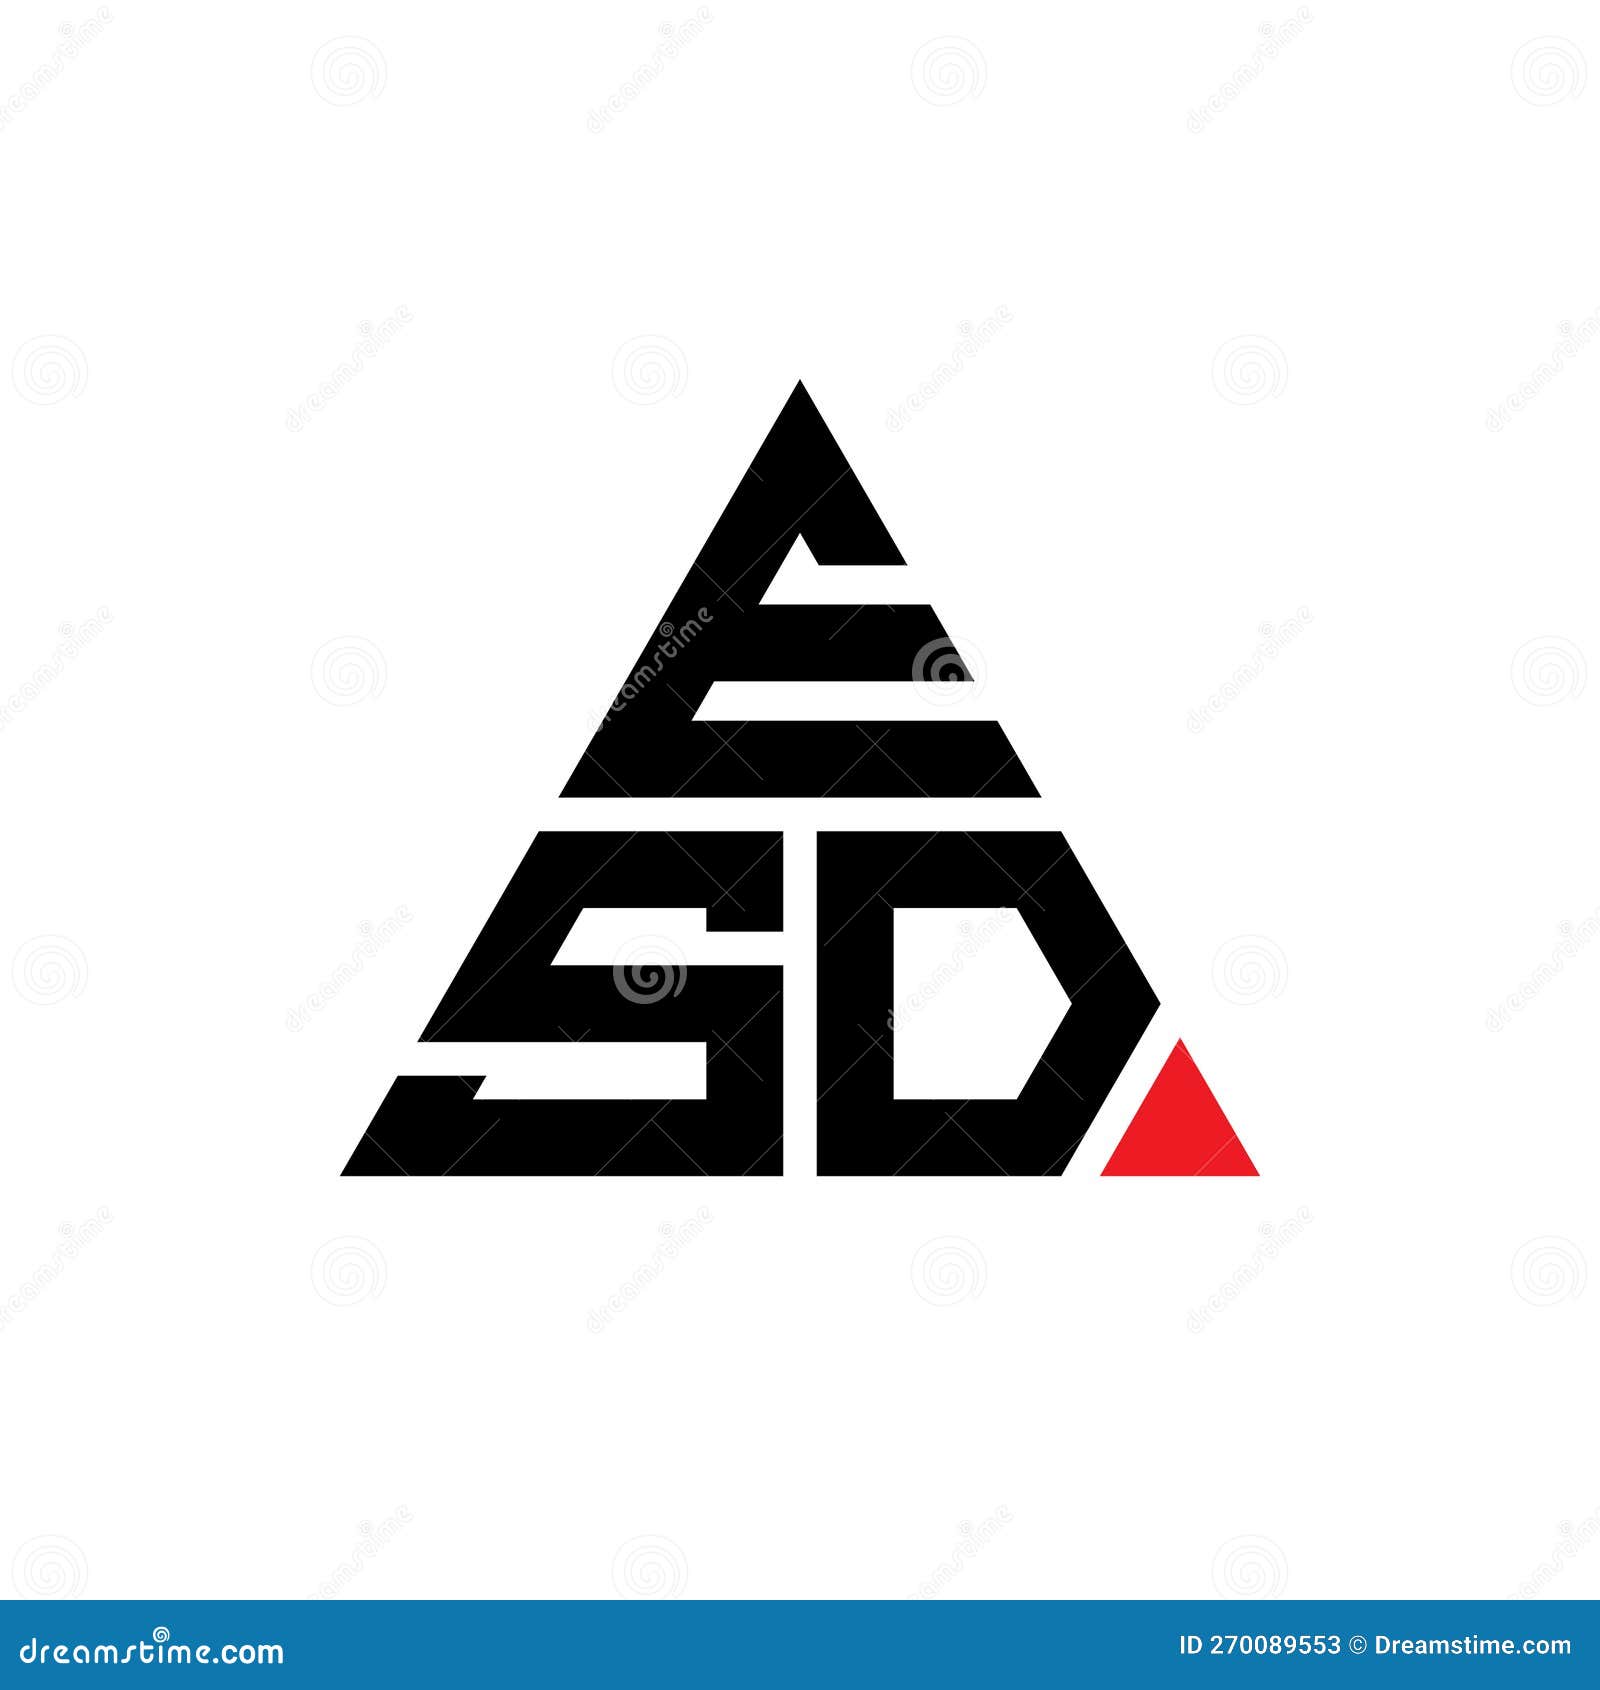 esd triangle letter logo  with triangle . esd triangle logo  monogram. esd triangle  logo template with red